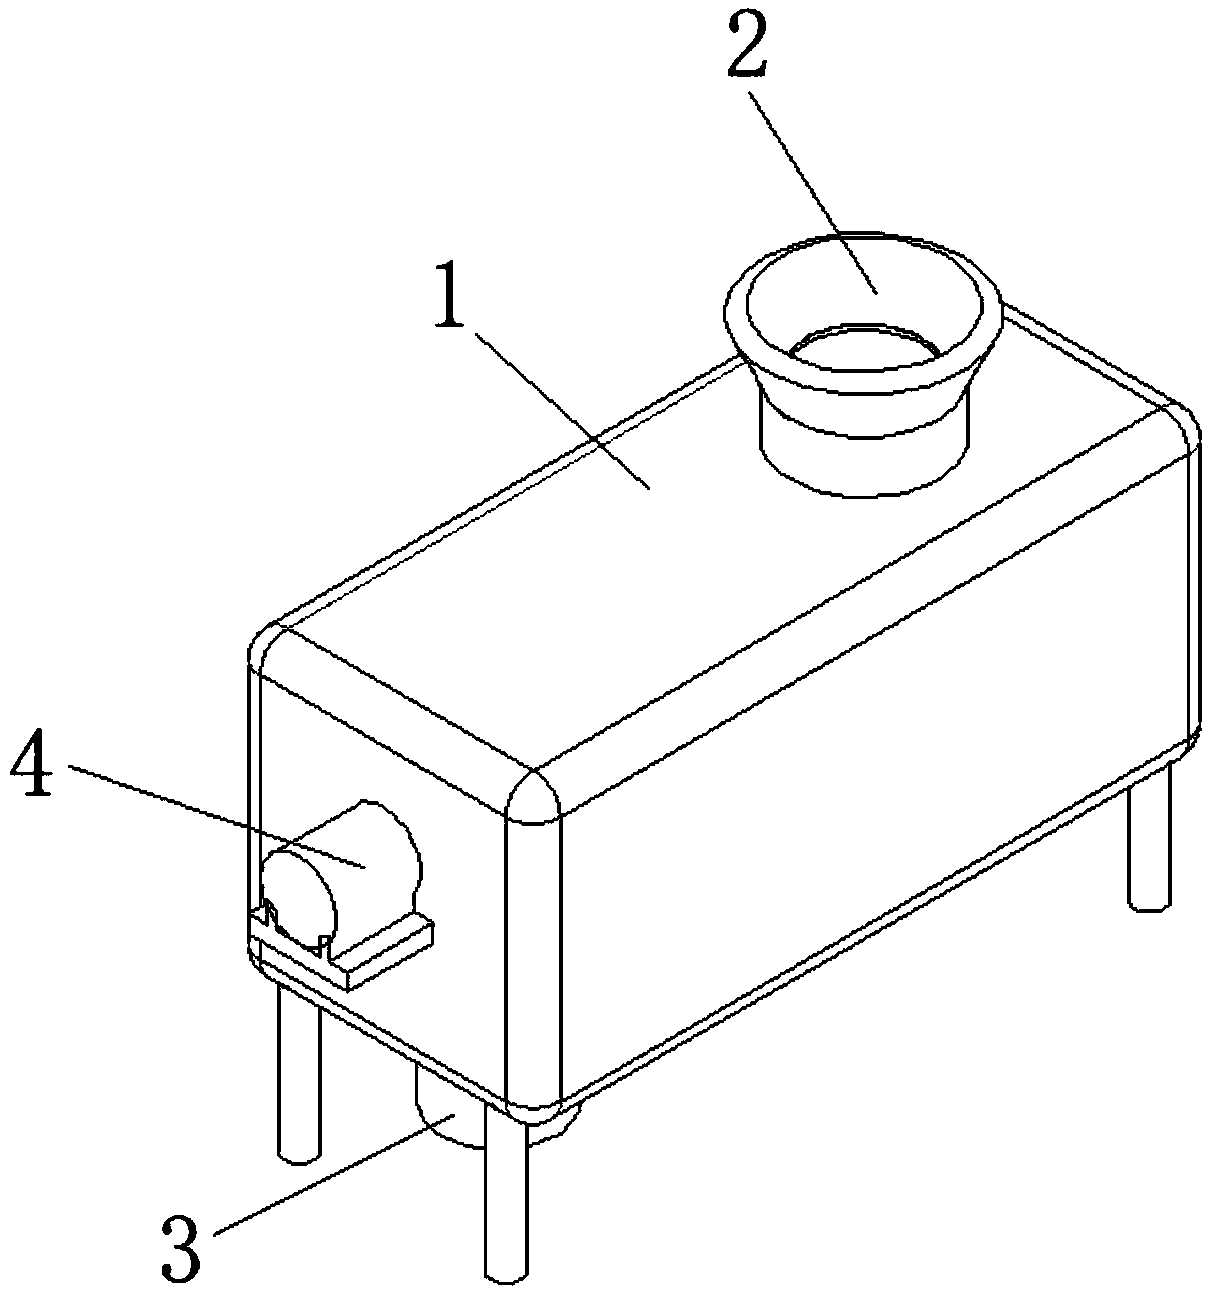 Spiral conveying type peanut shell breaking device